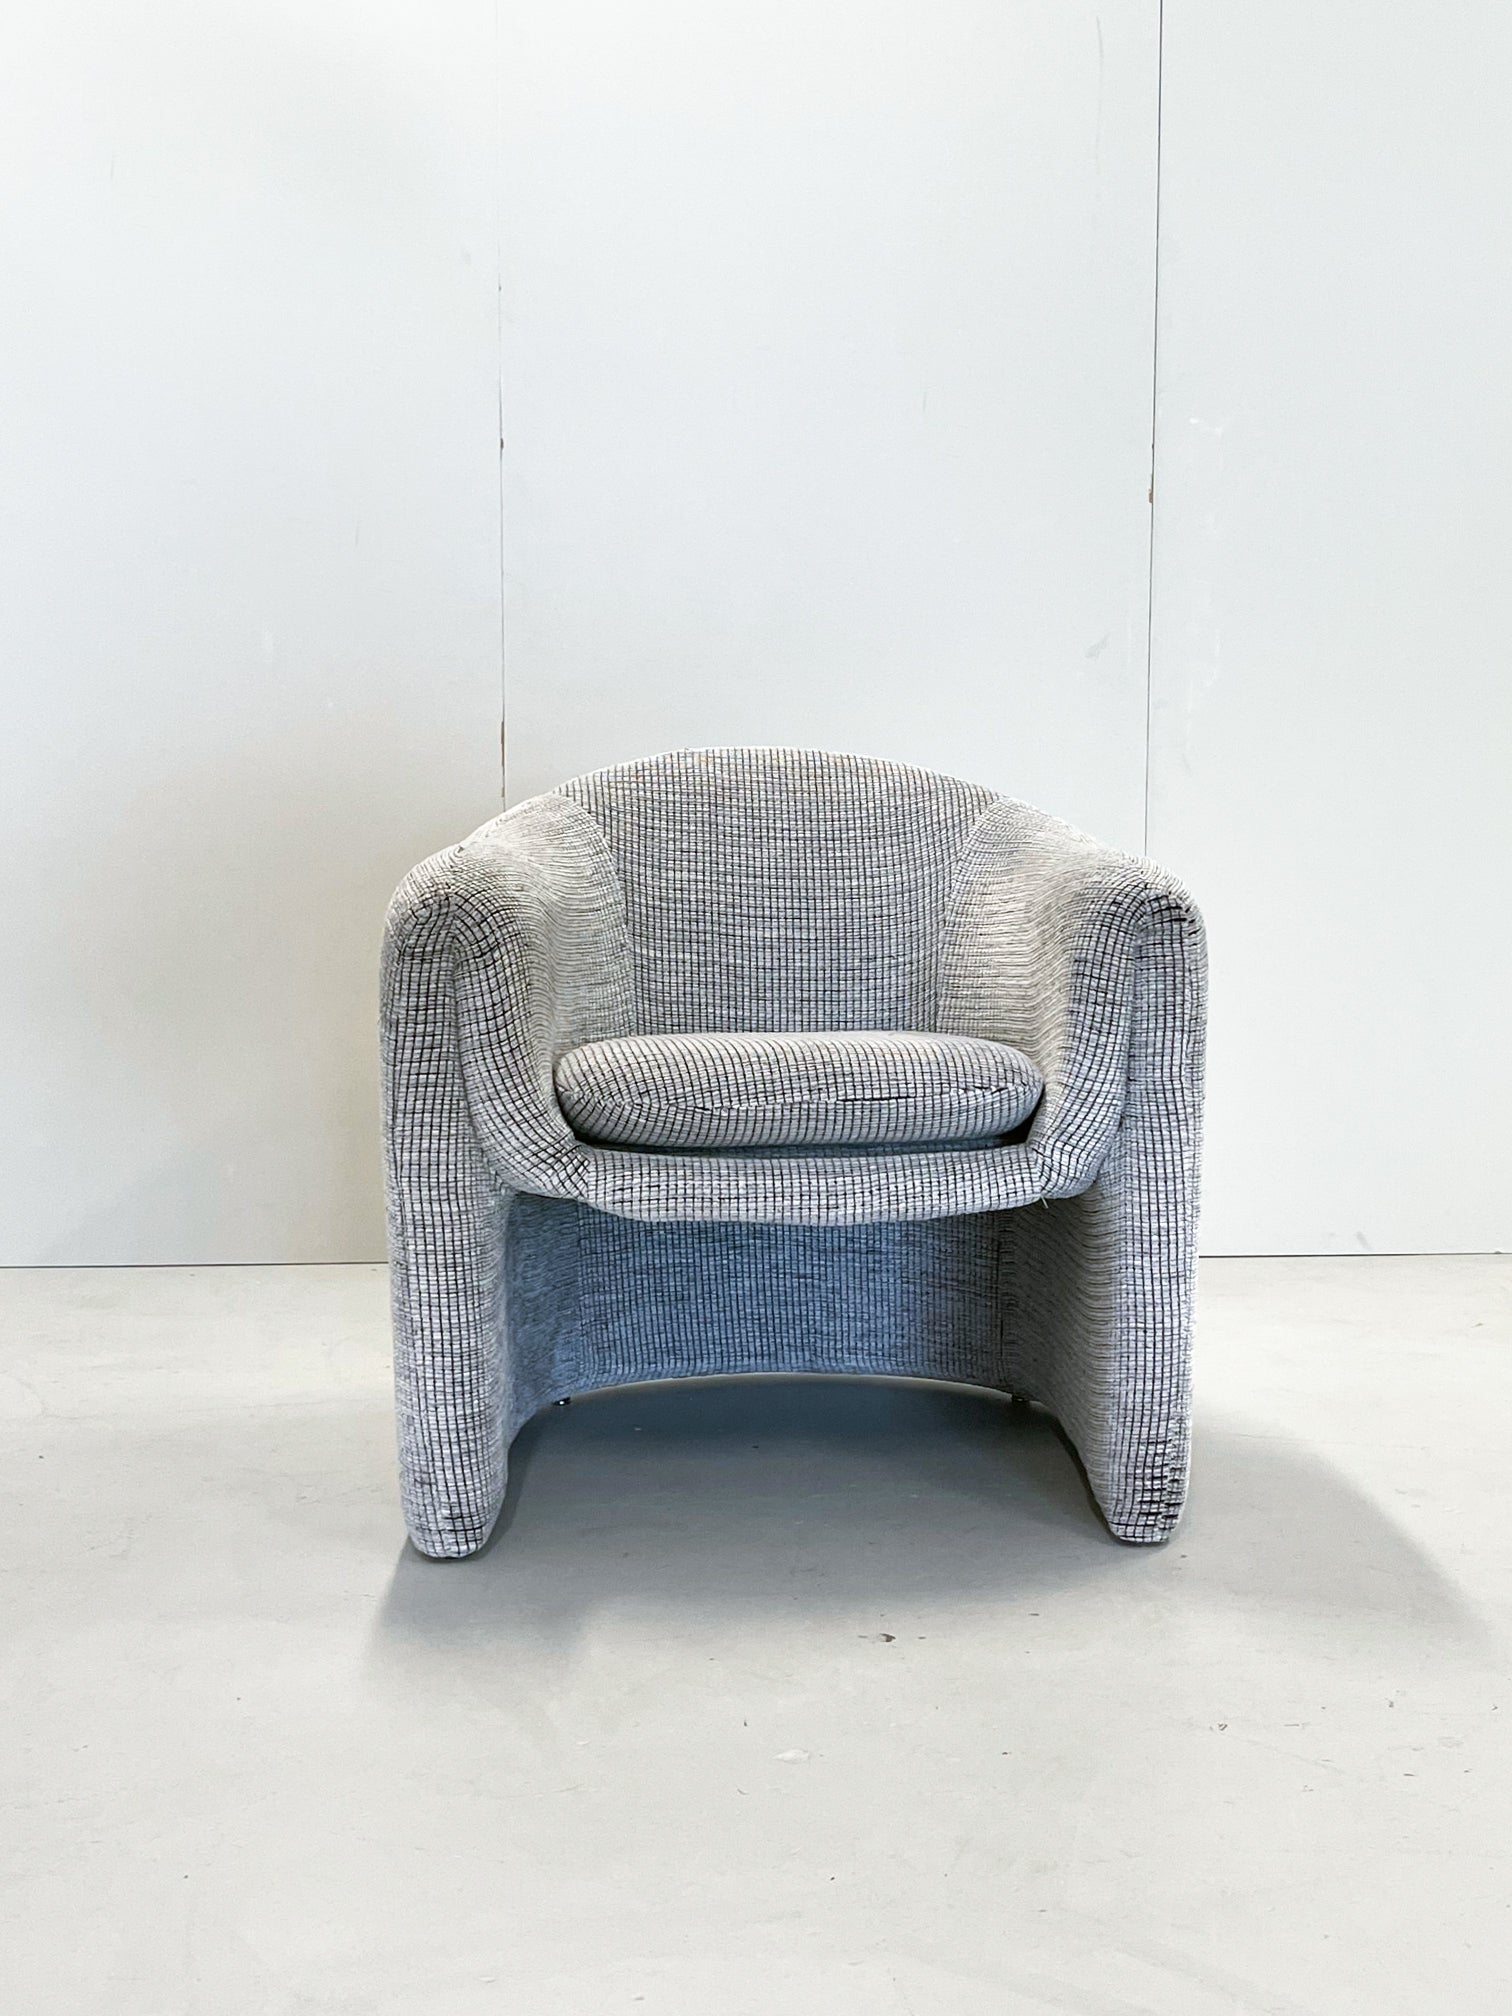 Freeform Armchair by Vladimir Kagan for Preview